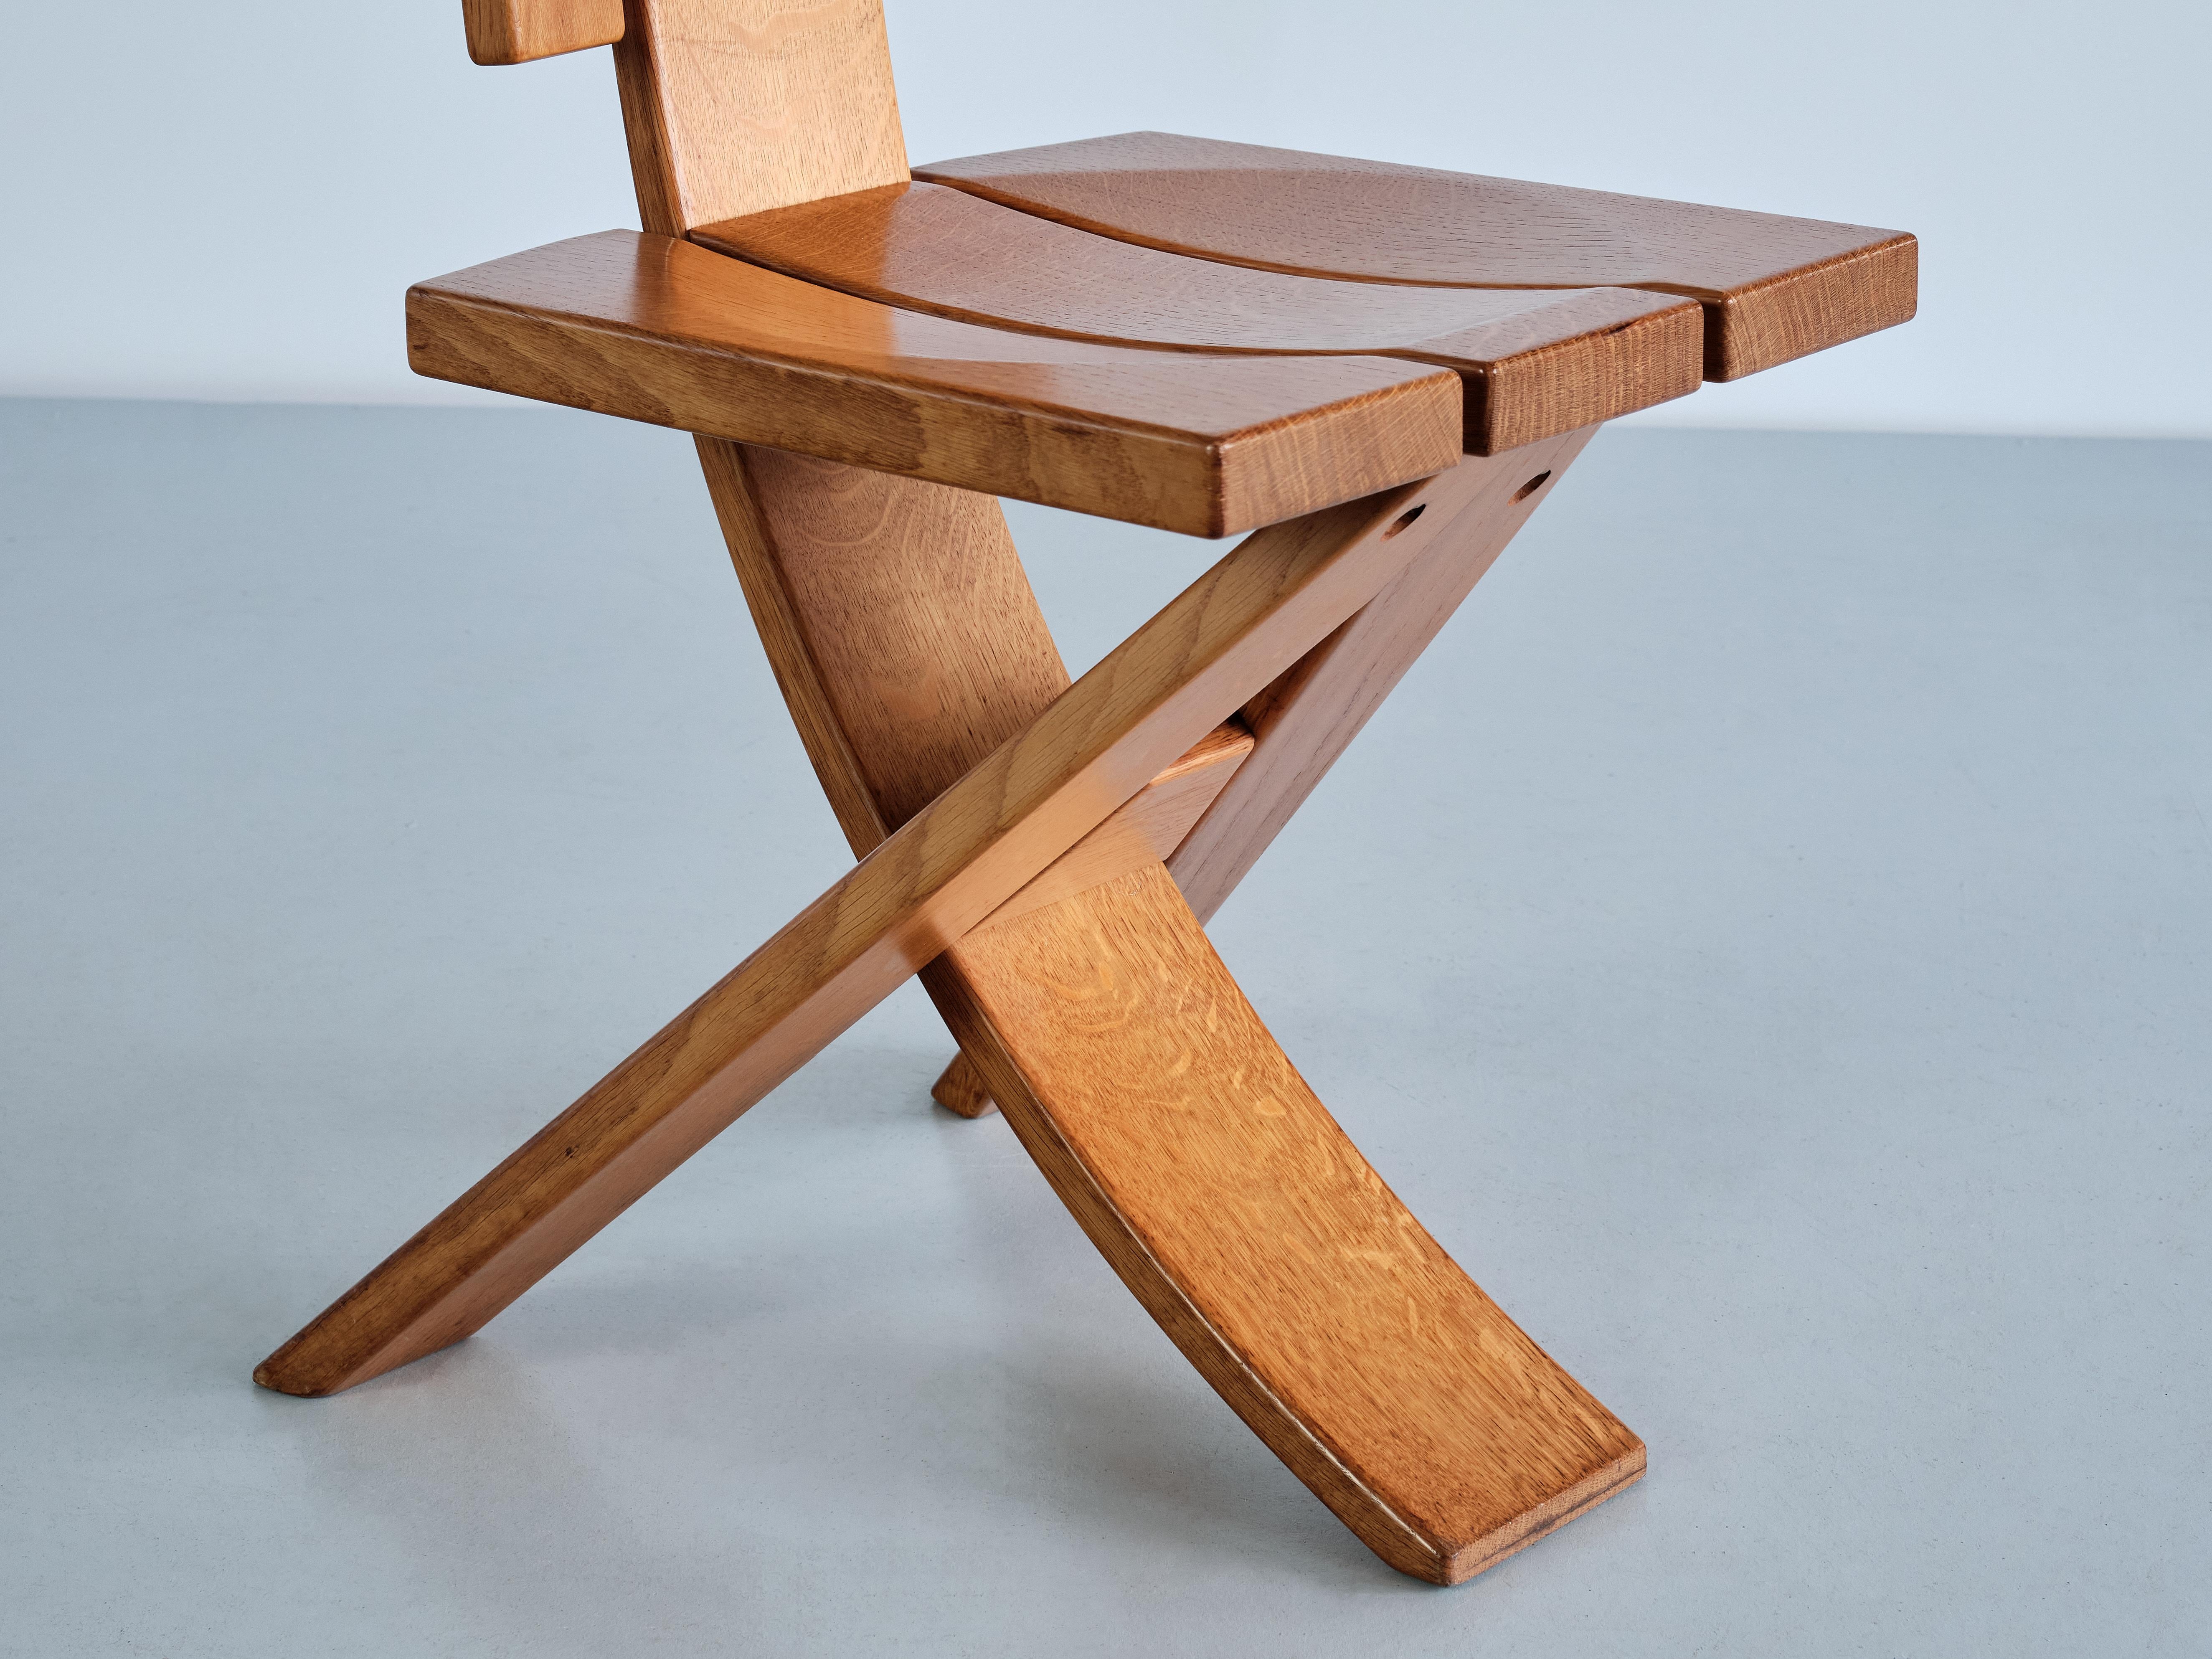 Sculptural Set of Four Ebénisterie Seltz Dining Chairs in Oak, France, 1970s For Sale 3